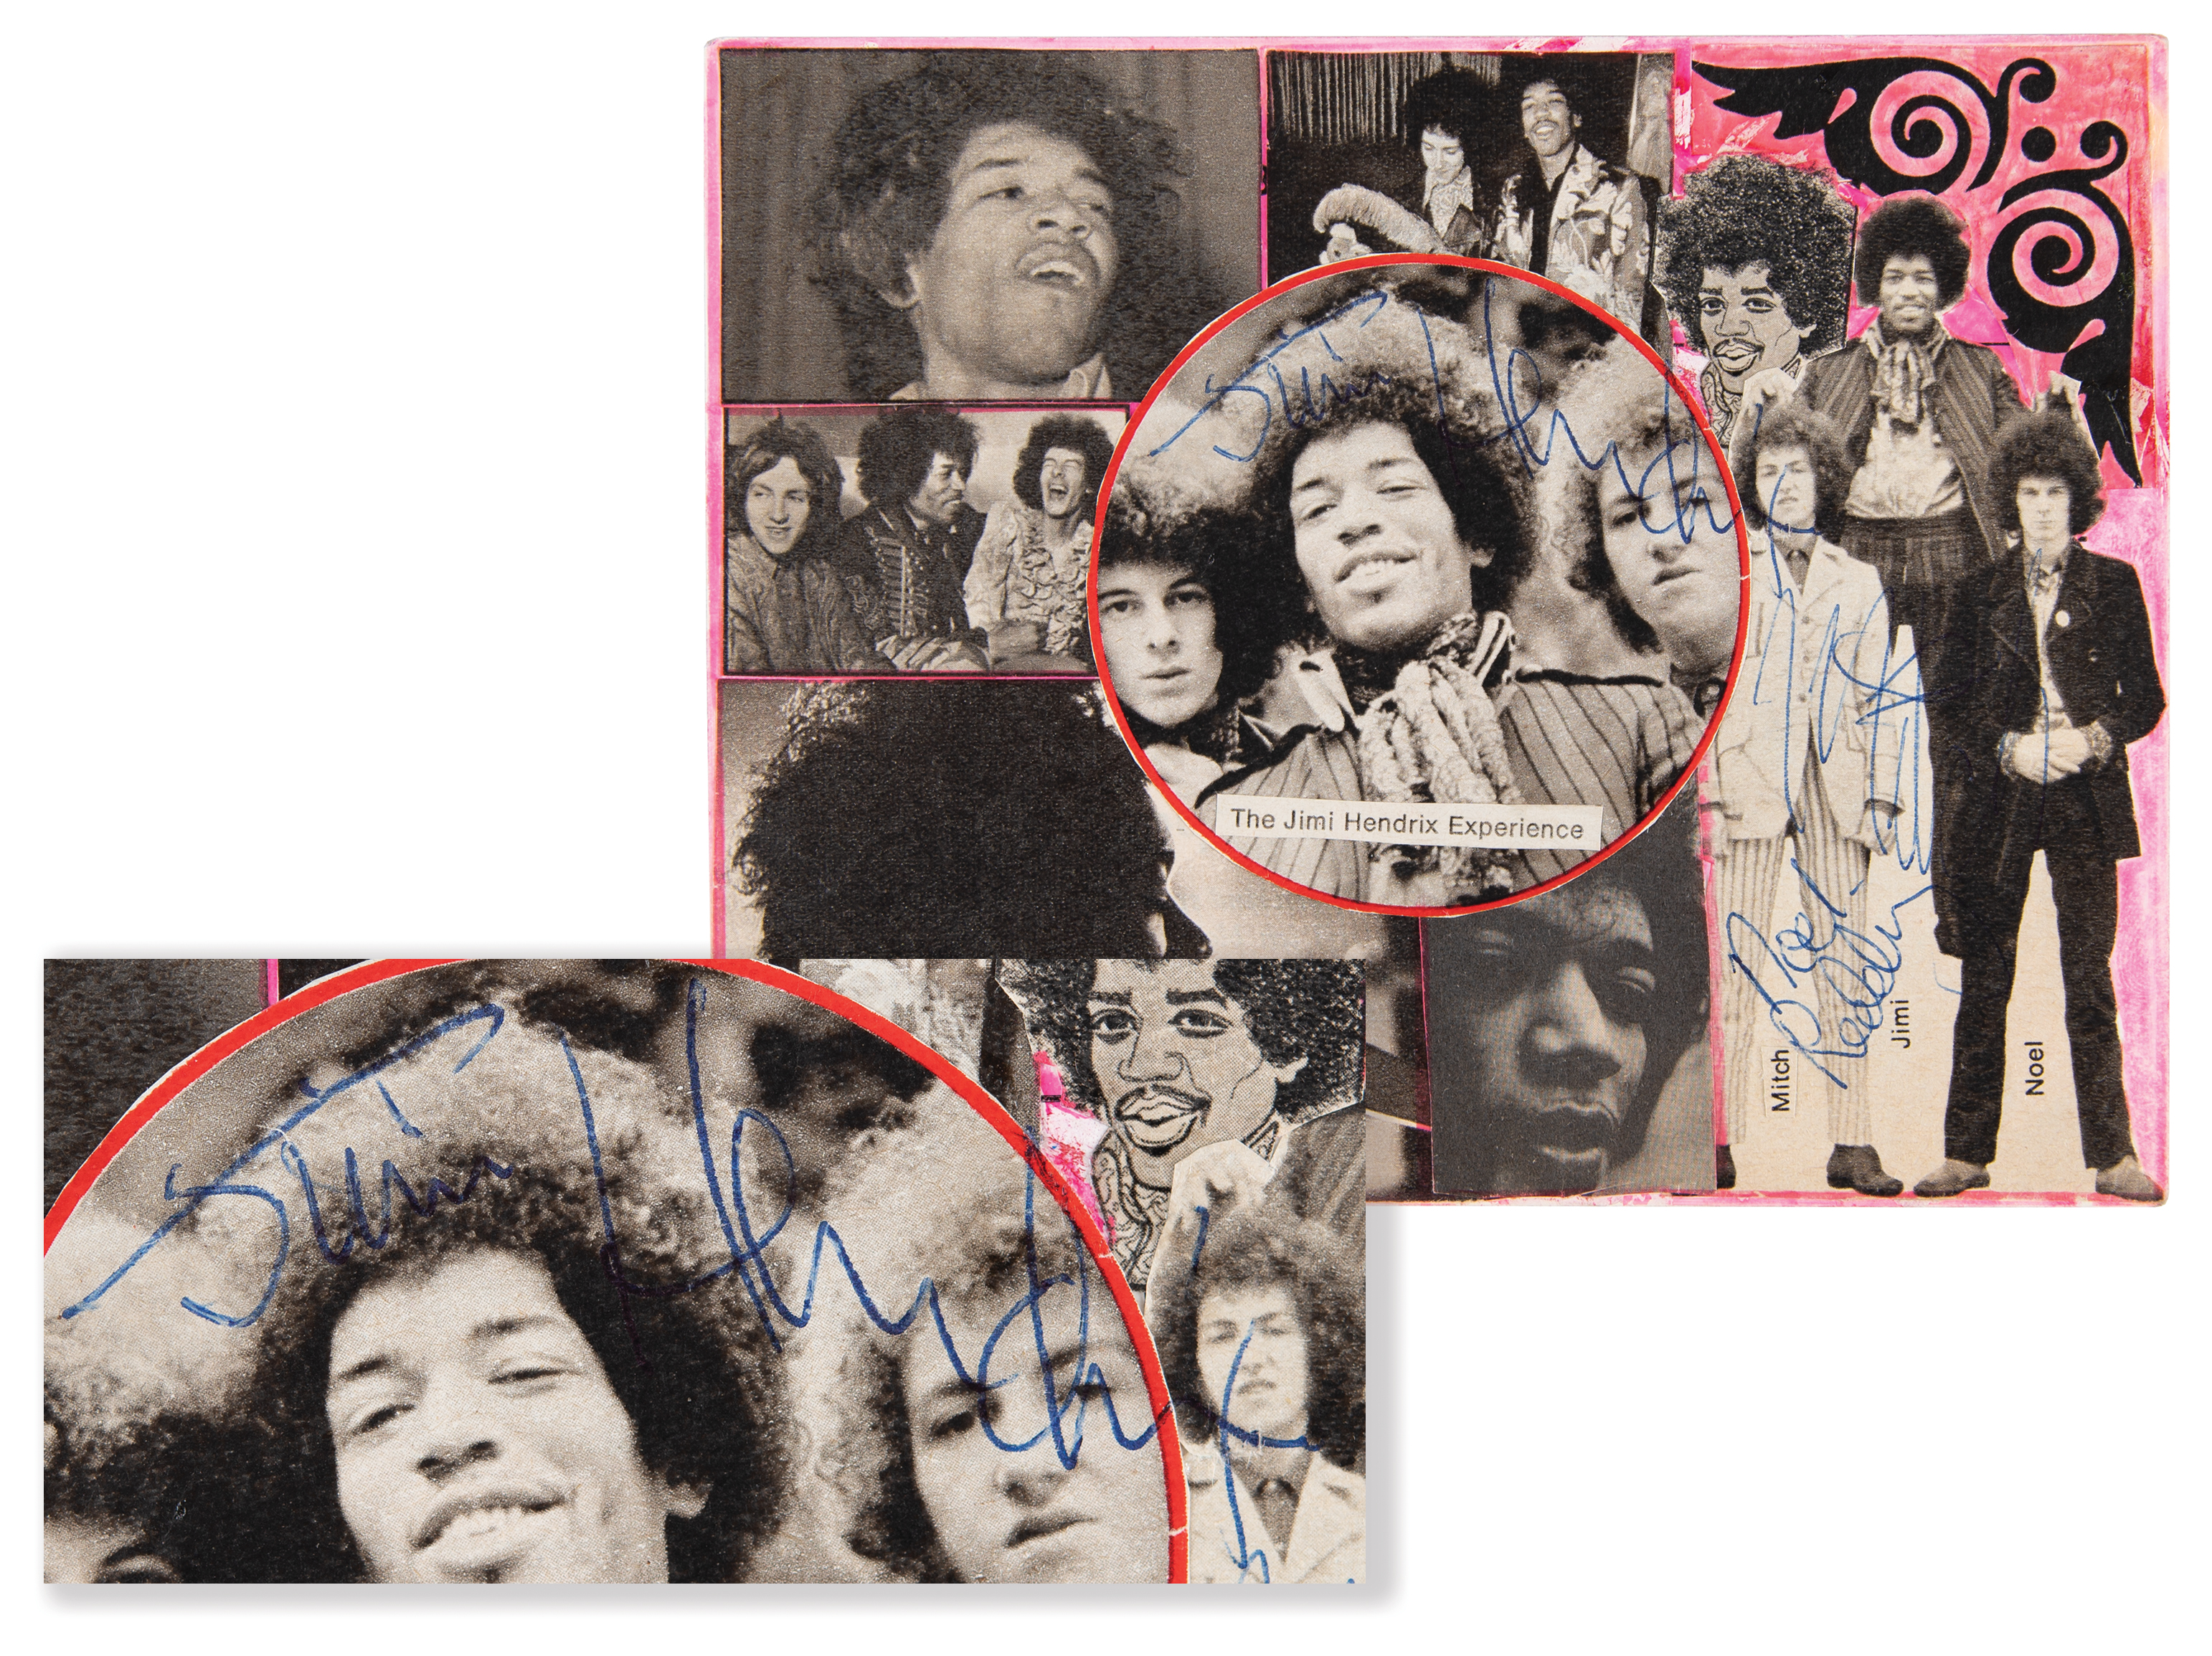 Lot #9061 Jimi Hendrix Experience Signed Photograph - Obtained In-Person at the Halle Münsterland in 1969 - Image 1